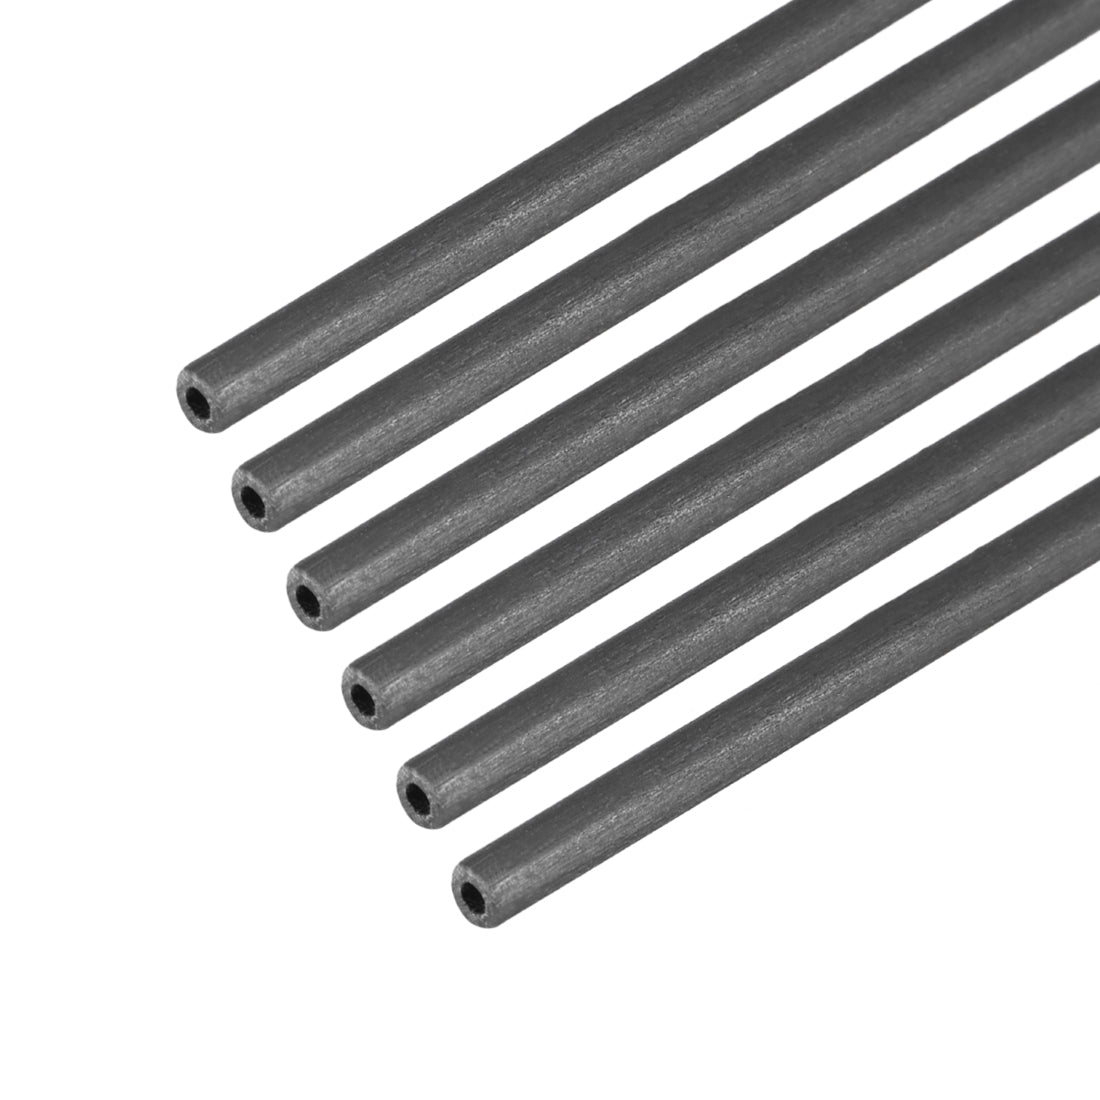 uxcell Uxcell Carbon Fiber Round Tube 2mm x 1mm x 400mm Carbon Fiber Wing Pultrusion Tubing for RC Airplane Quadcopter 6pcs